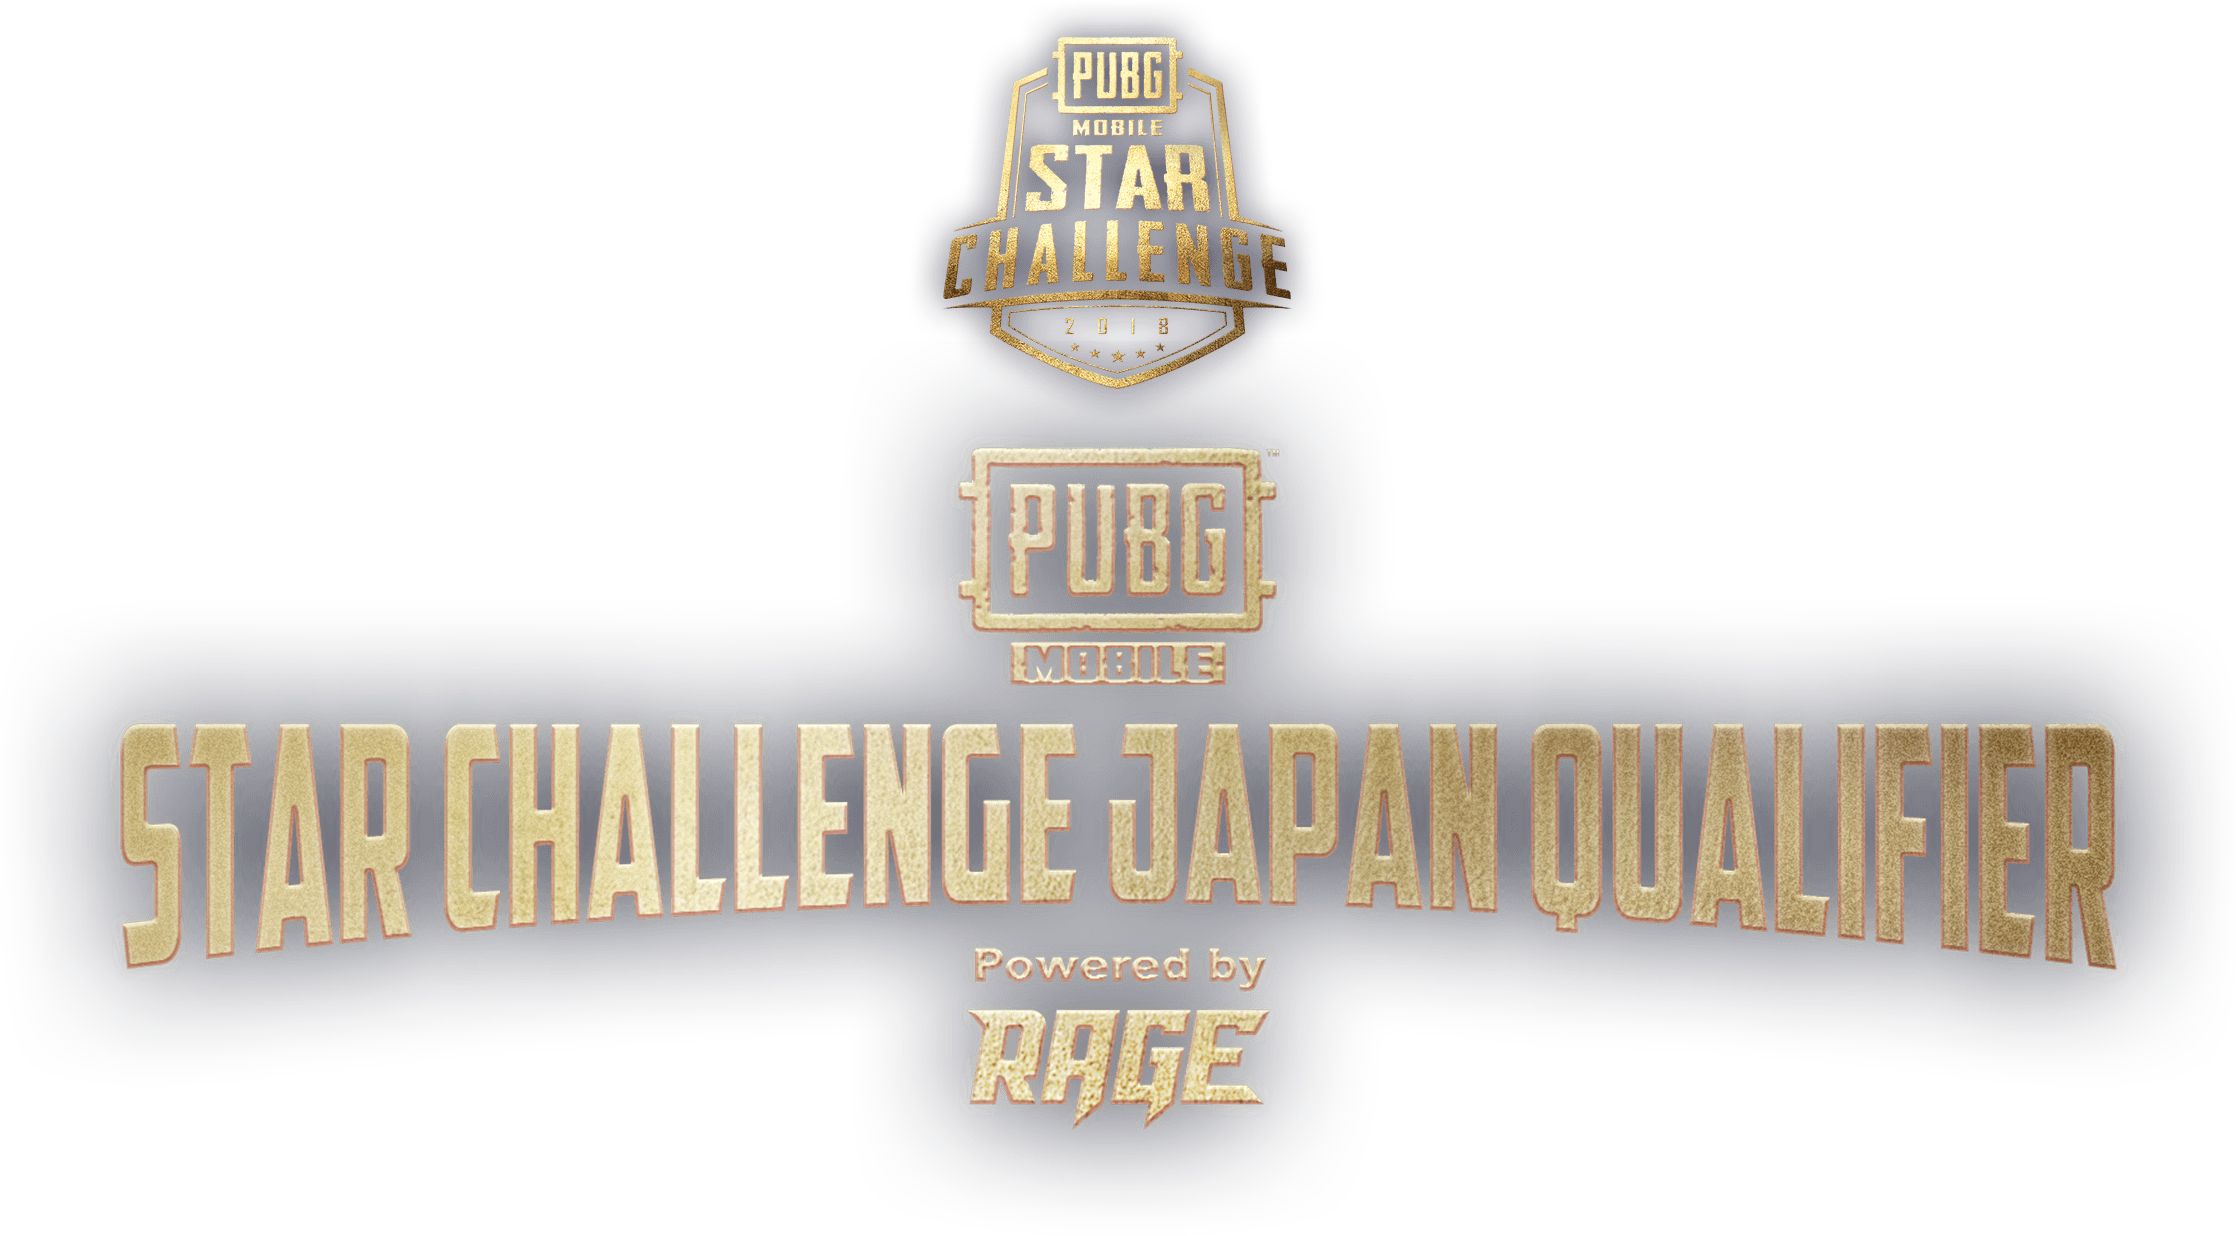 PUBG MOBILE STAR CHALLENGE JAPAN QUALIFIER Powered by RAGE